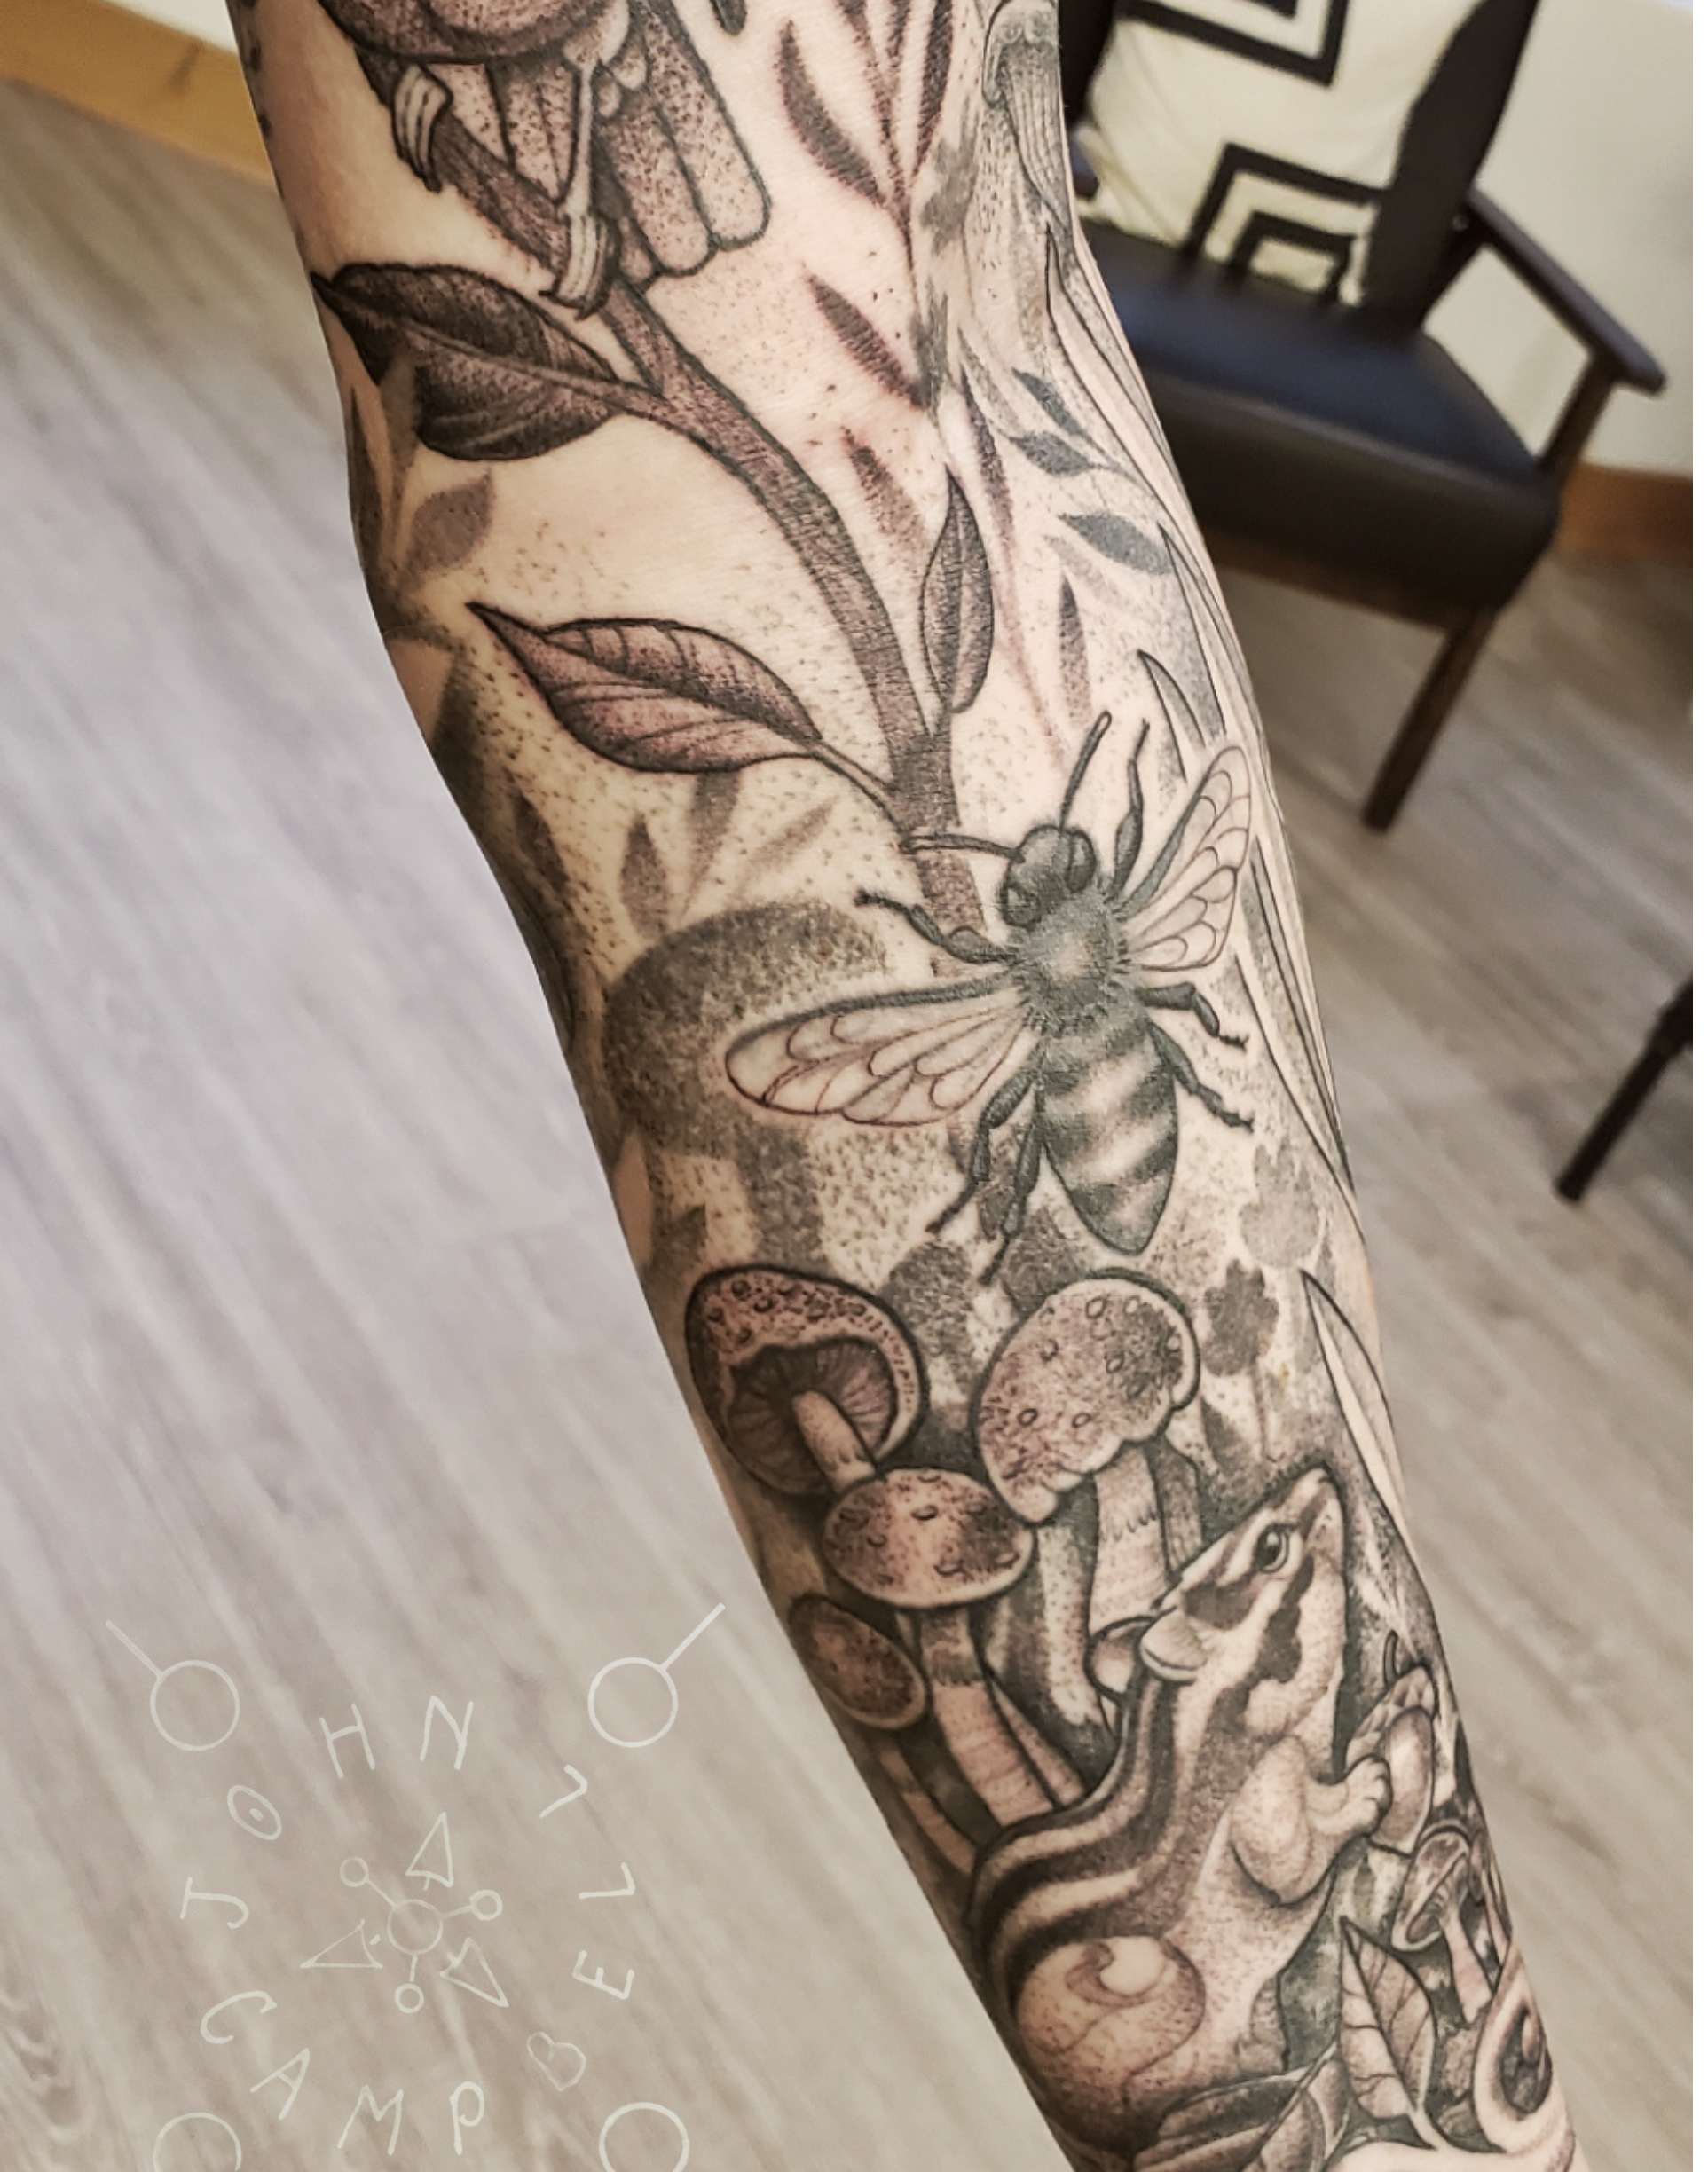 Black and Grey fine line wildlife with birds, bees and mushrooms sleeve tattoo by John Campbell at Sacred Mandala Studio tattoo parlor in Durham, NC.